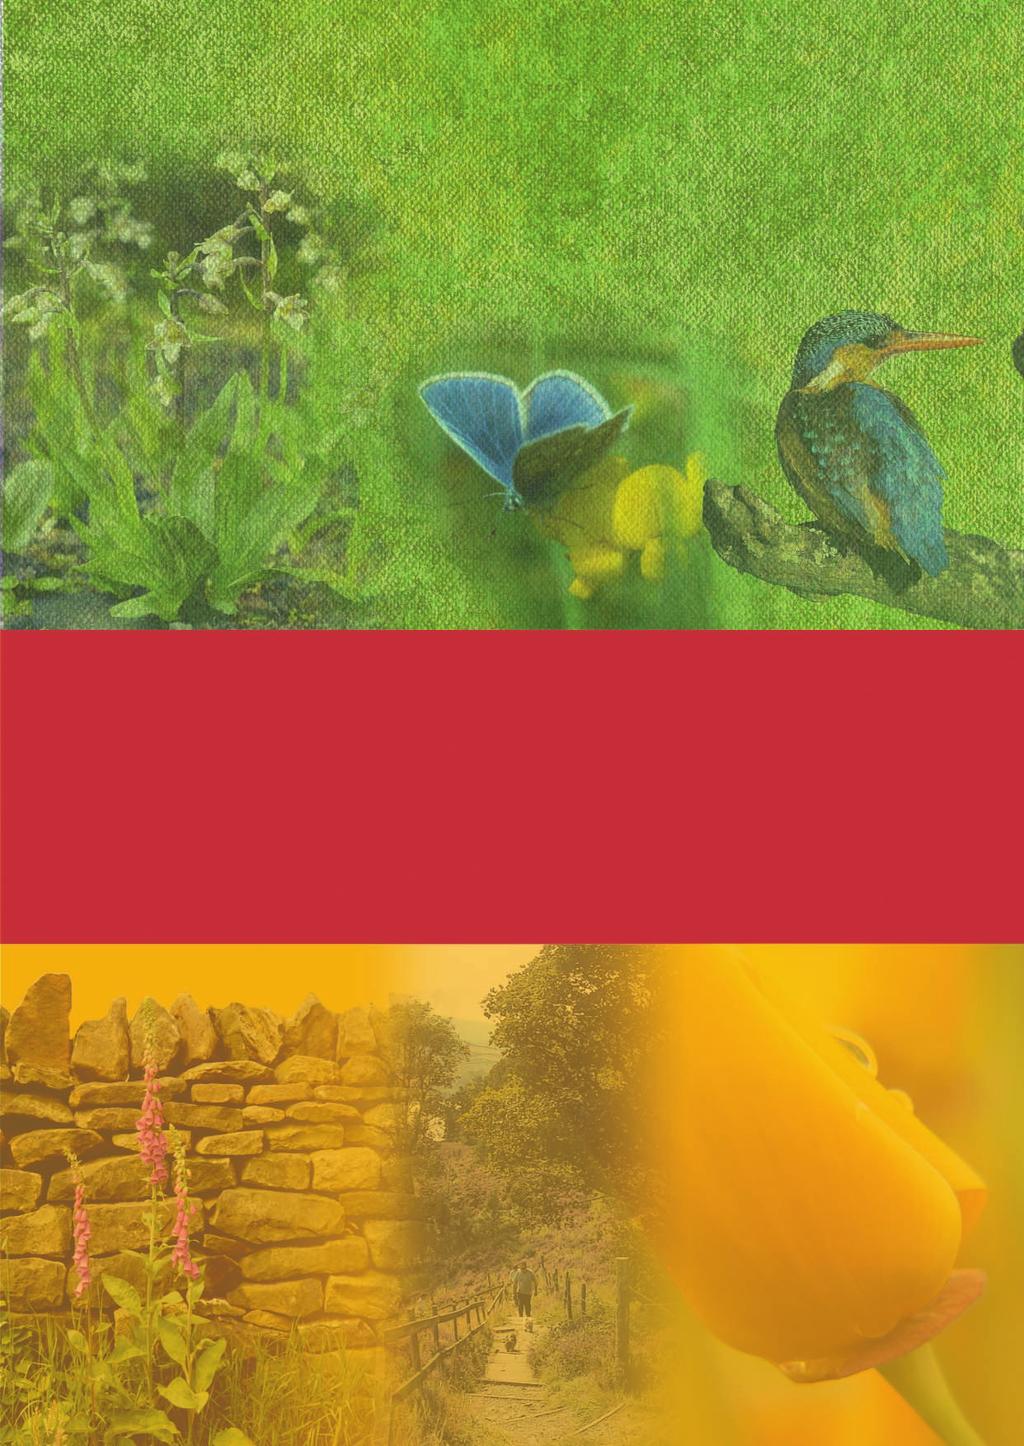 An introduction to the Kirklees Biodiversity Action Plan